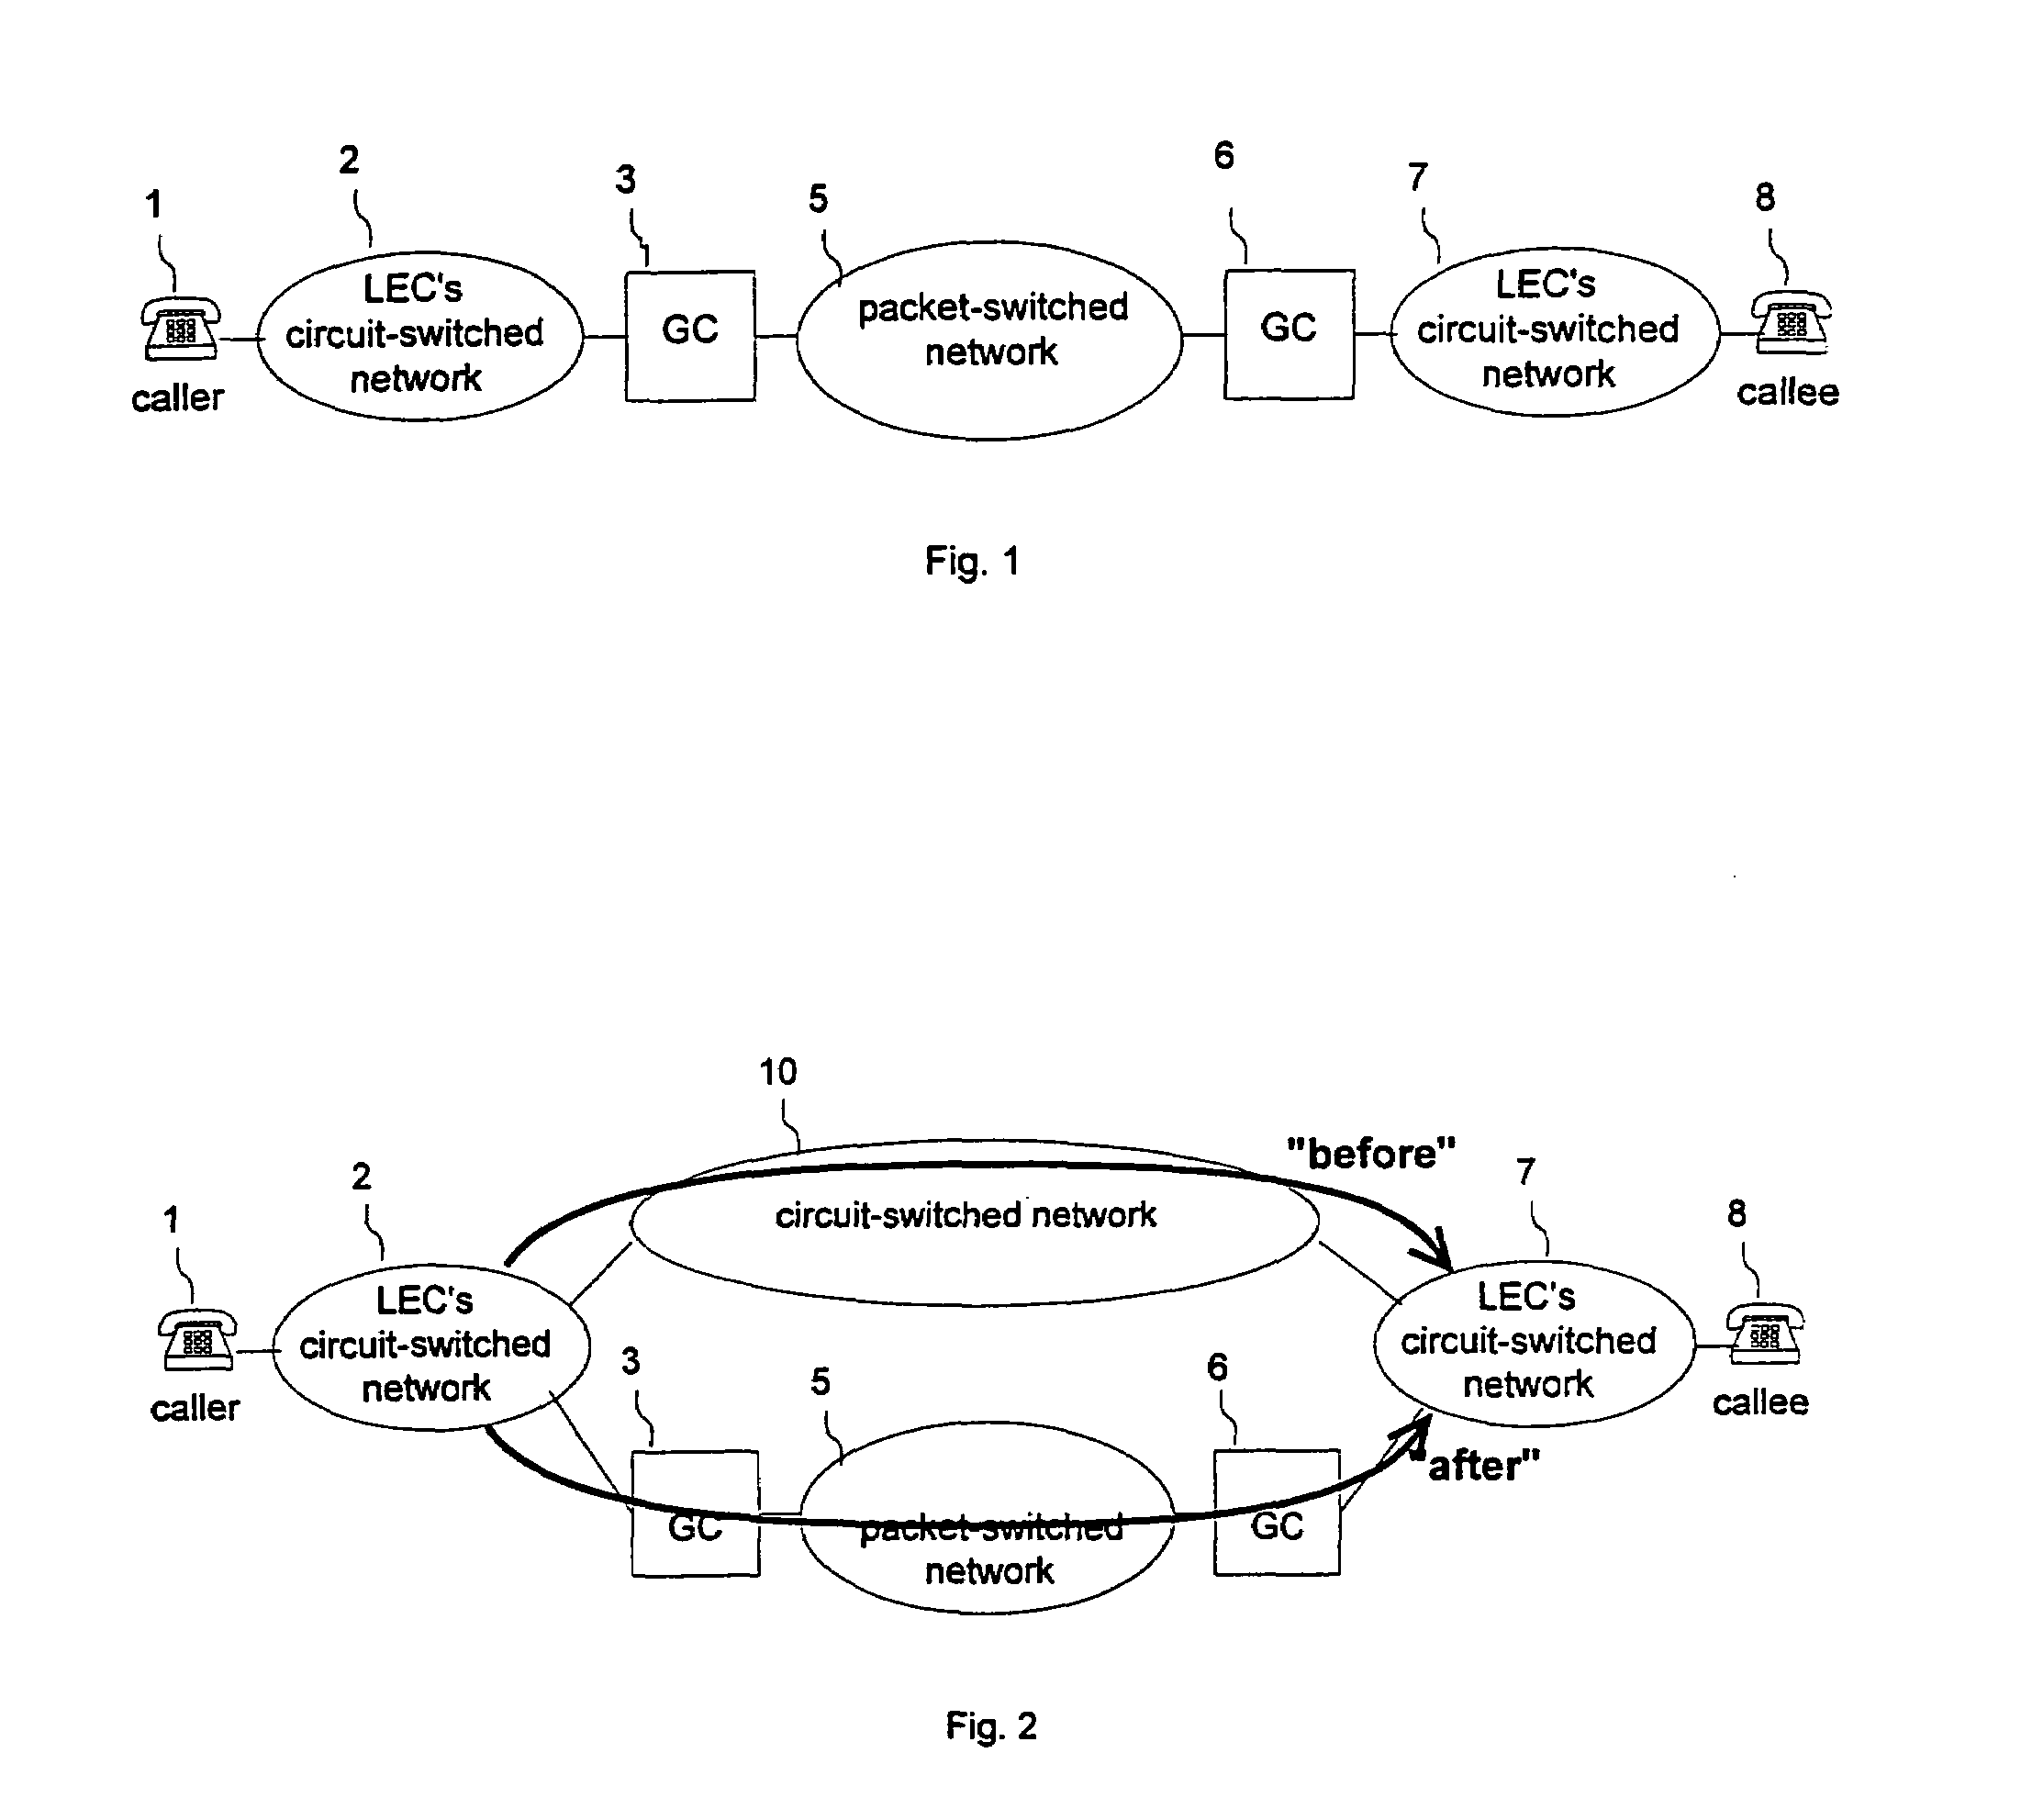 Hybrid packet-switched and circuit-switched telephony system